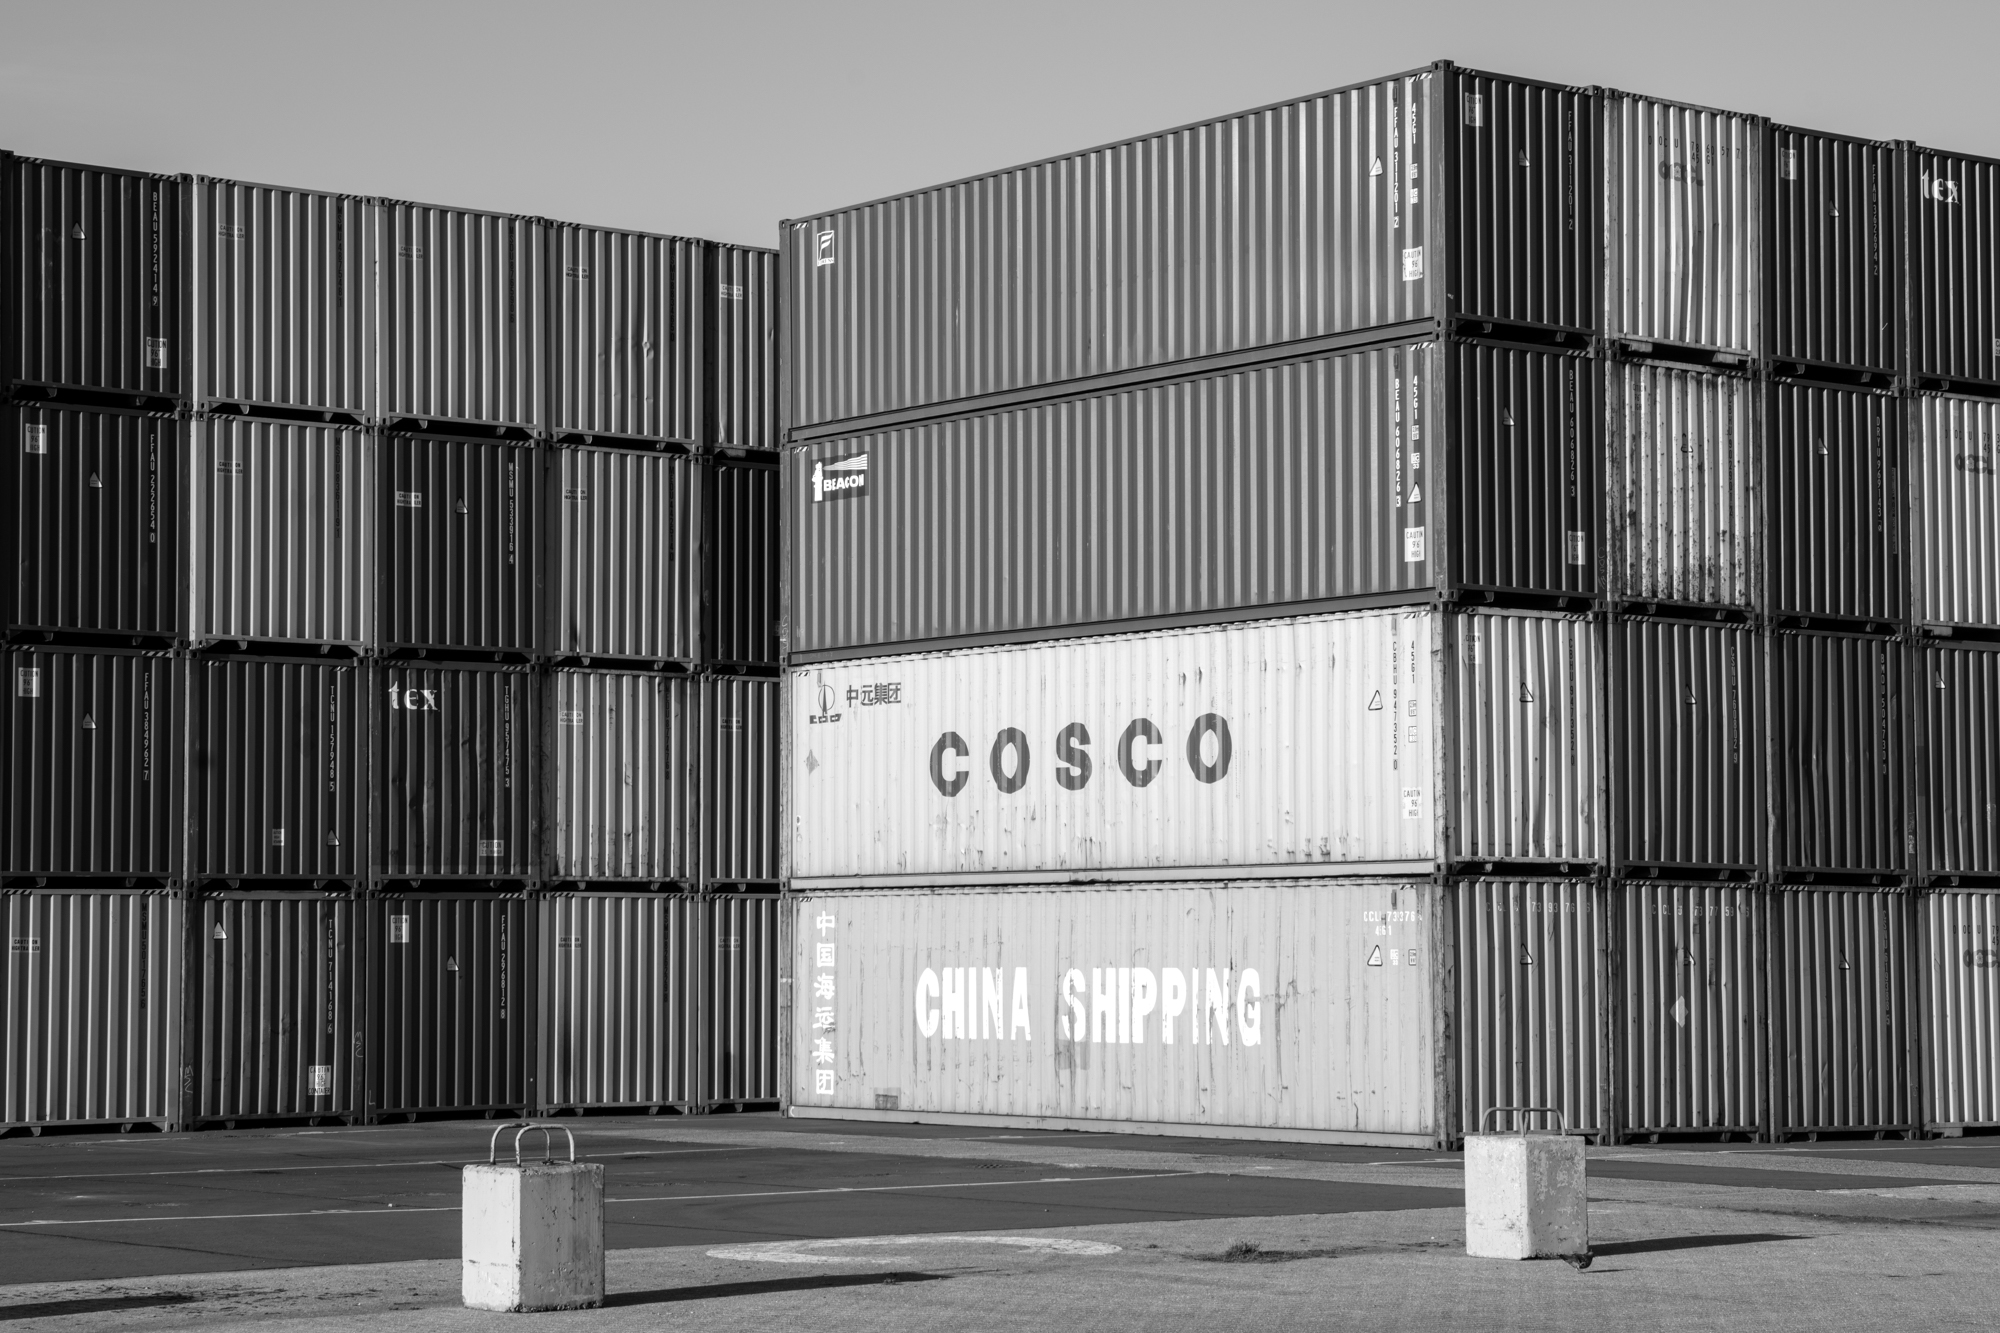 Black & white photo of shipping containers taken with the Pentax K-3 Mark III Monochrome